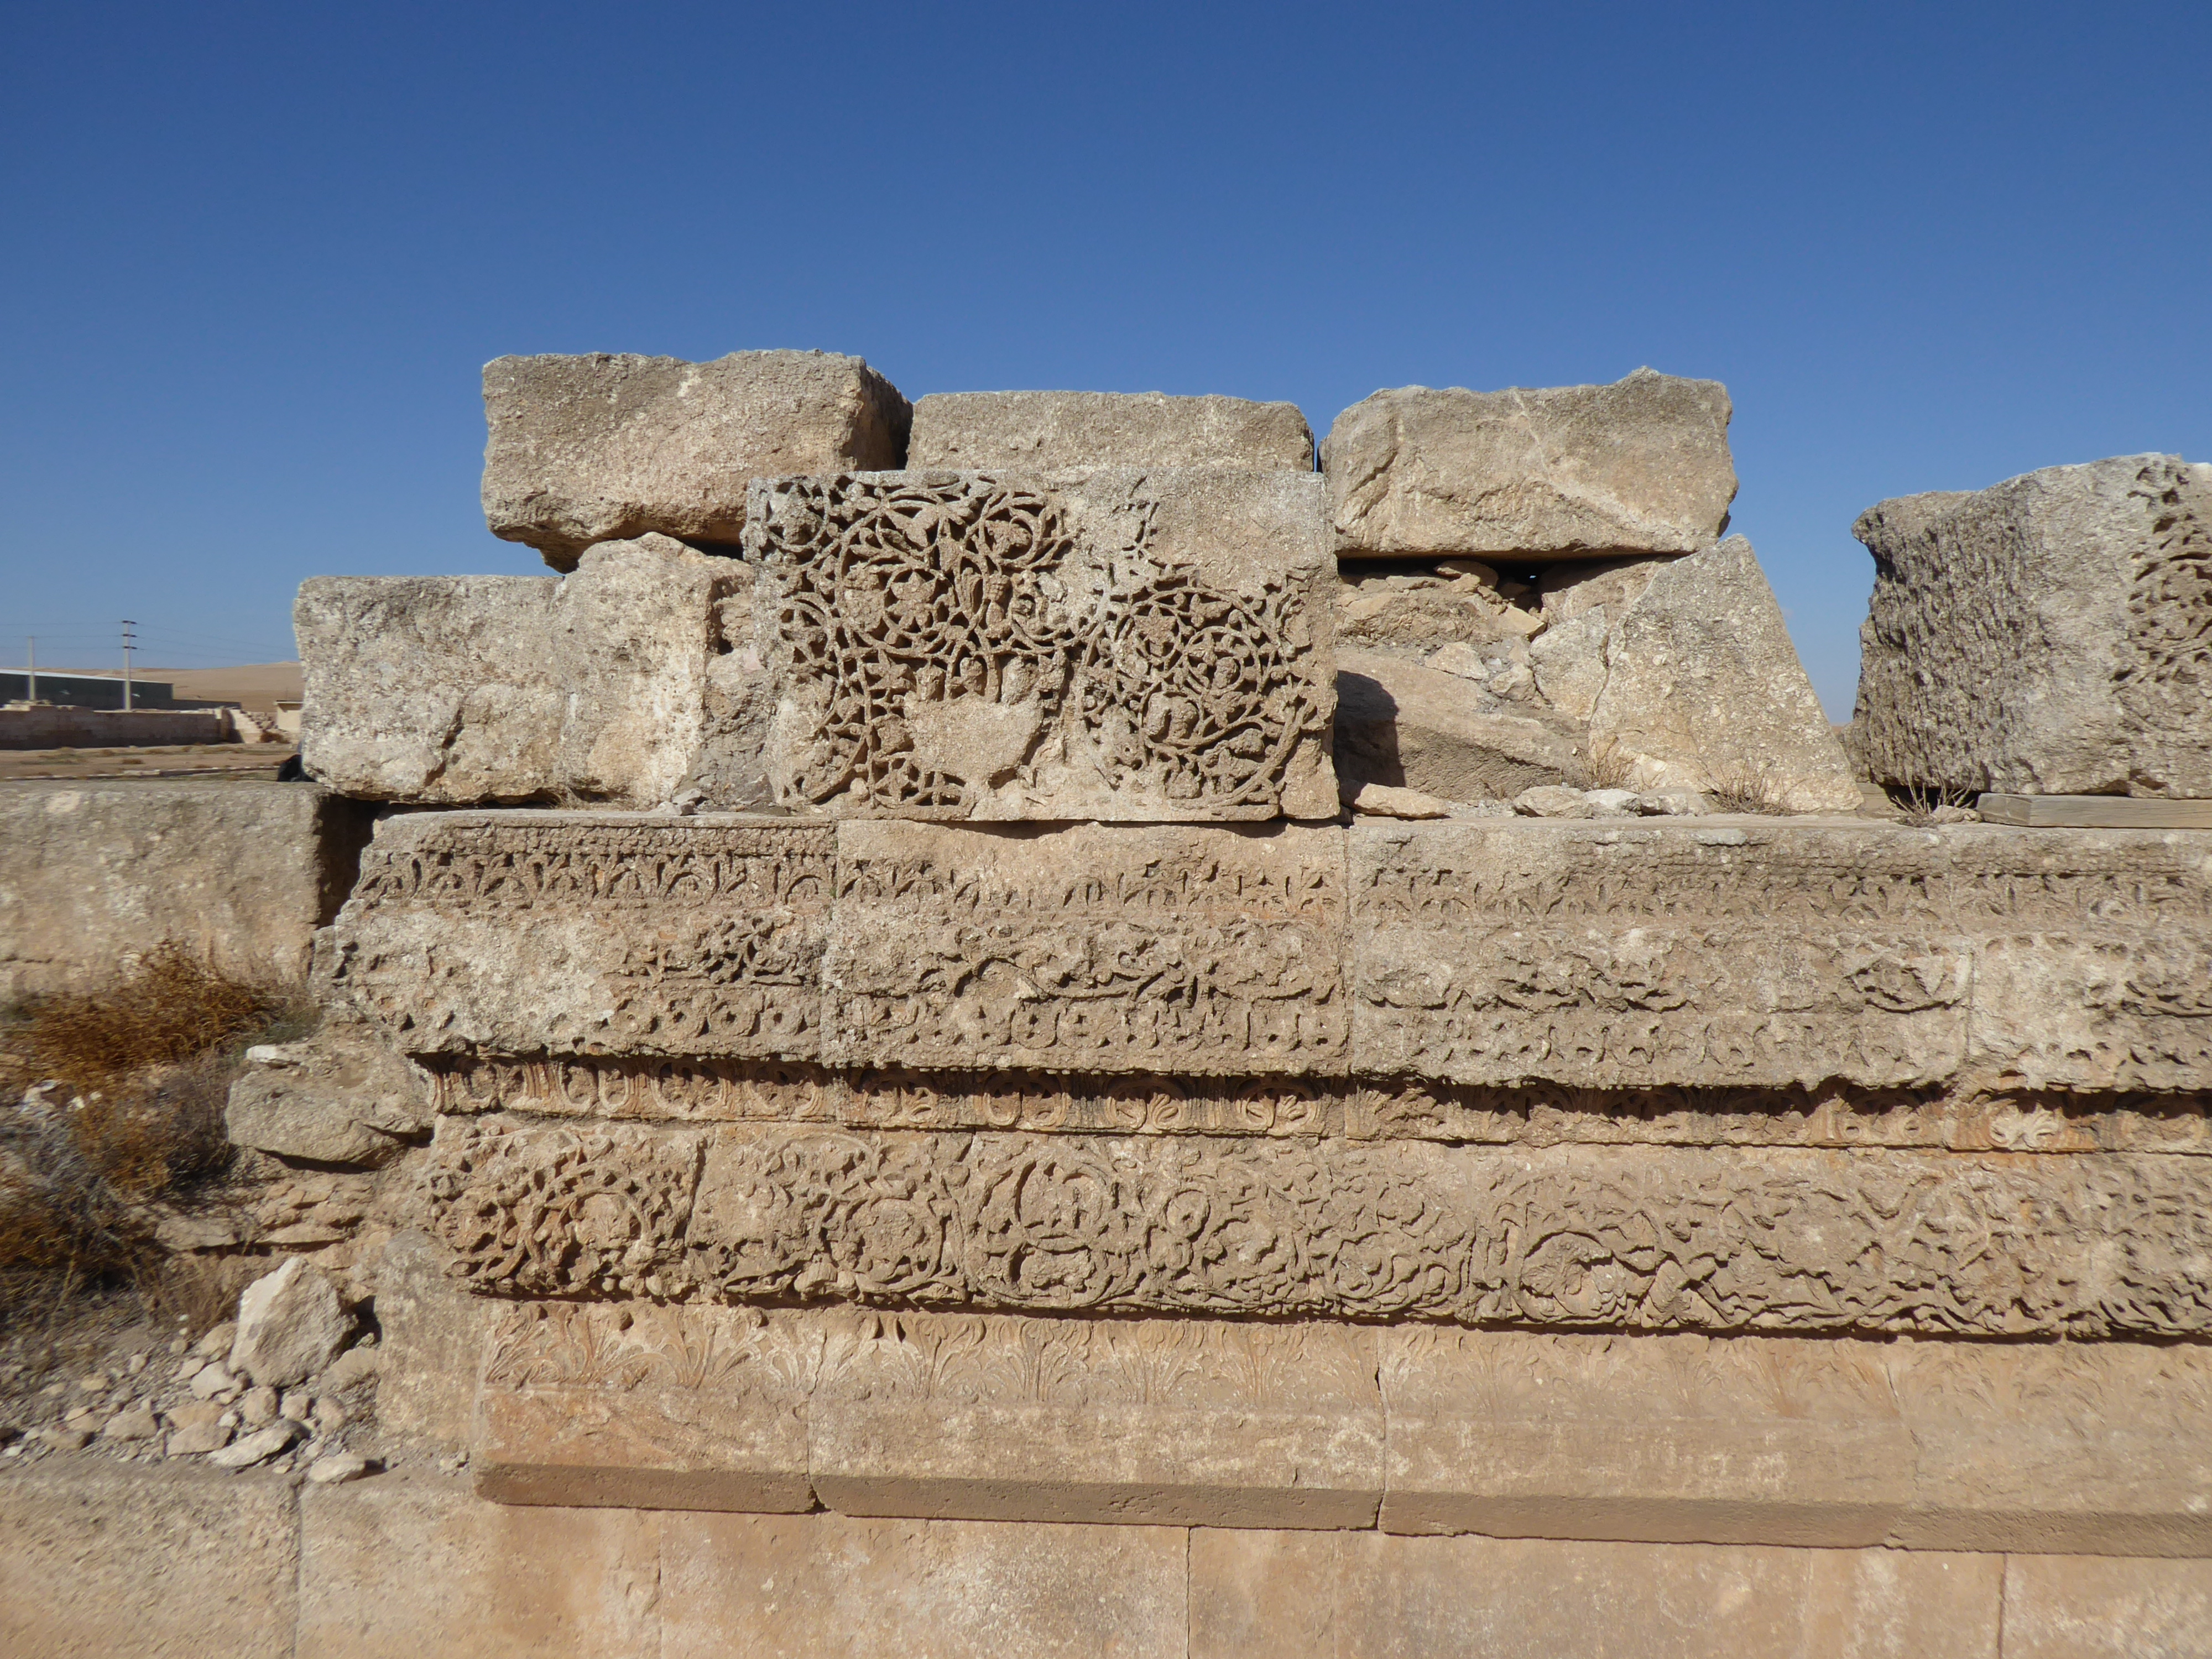 Cover image caption: A segment of the remaining frieze on the facade of the Mshatta Palace near Amman, Jordan, dated to the 740s and ascribed to the Caliph Walid II (743-44). Photo Nasser Rabbat.